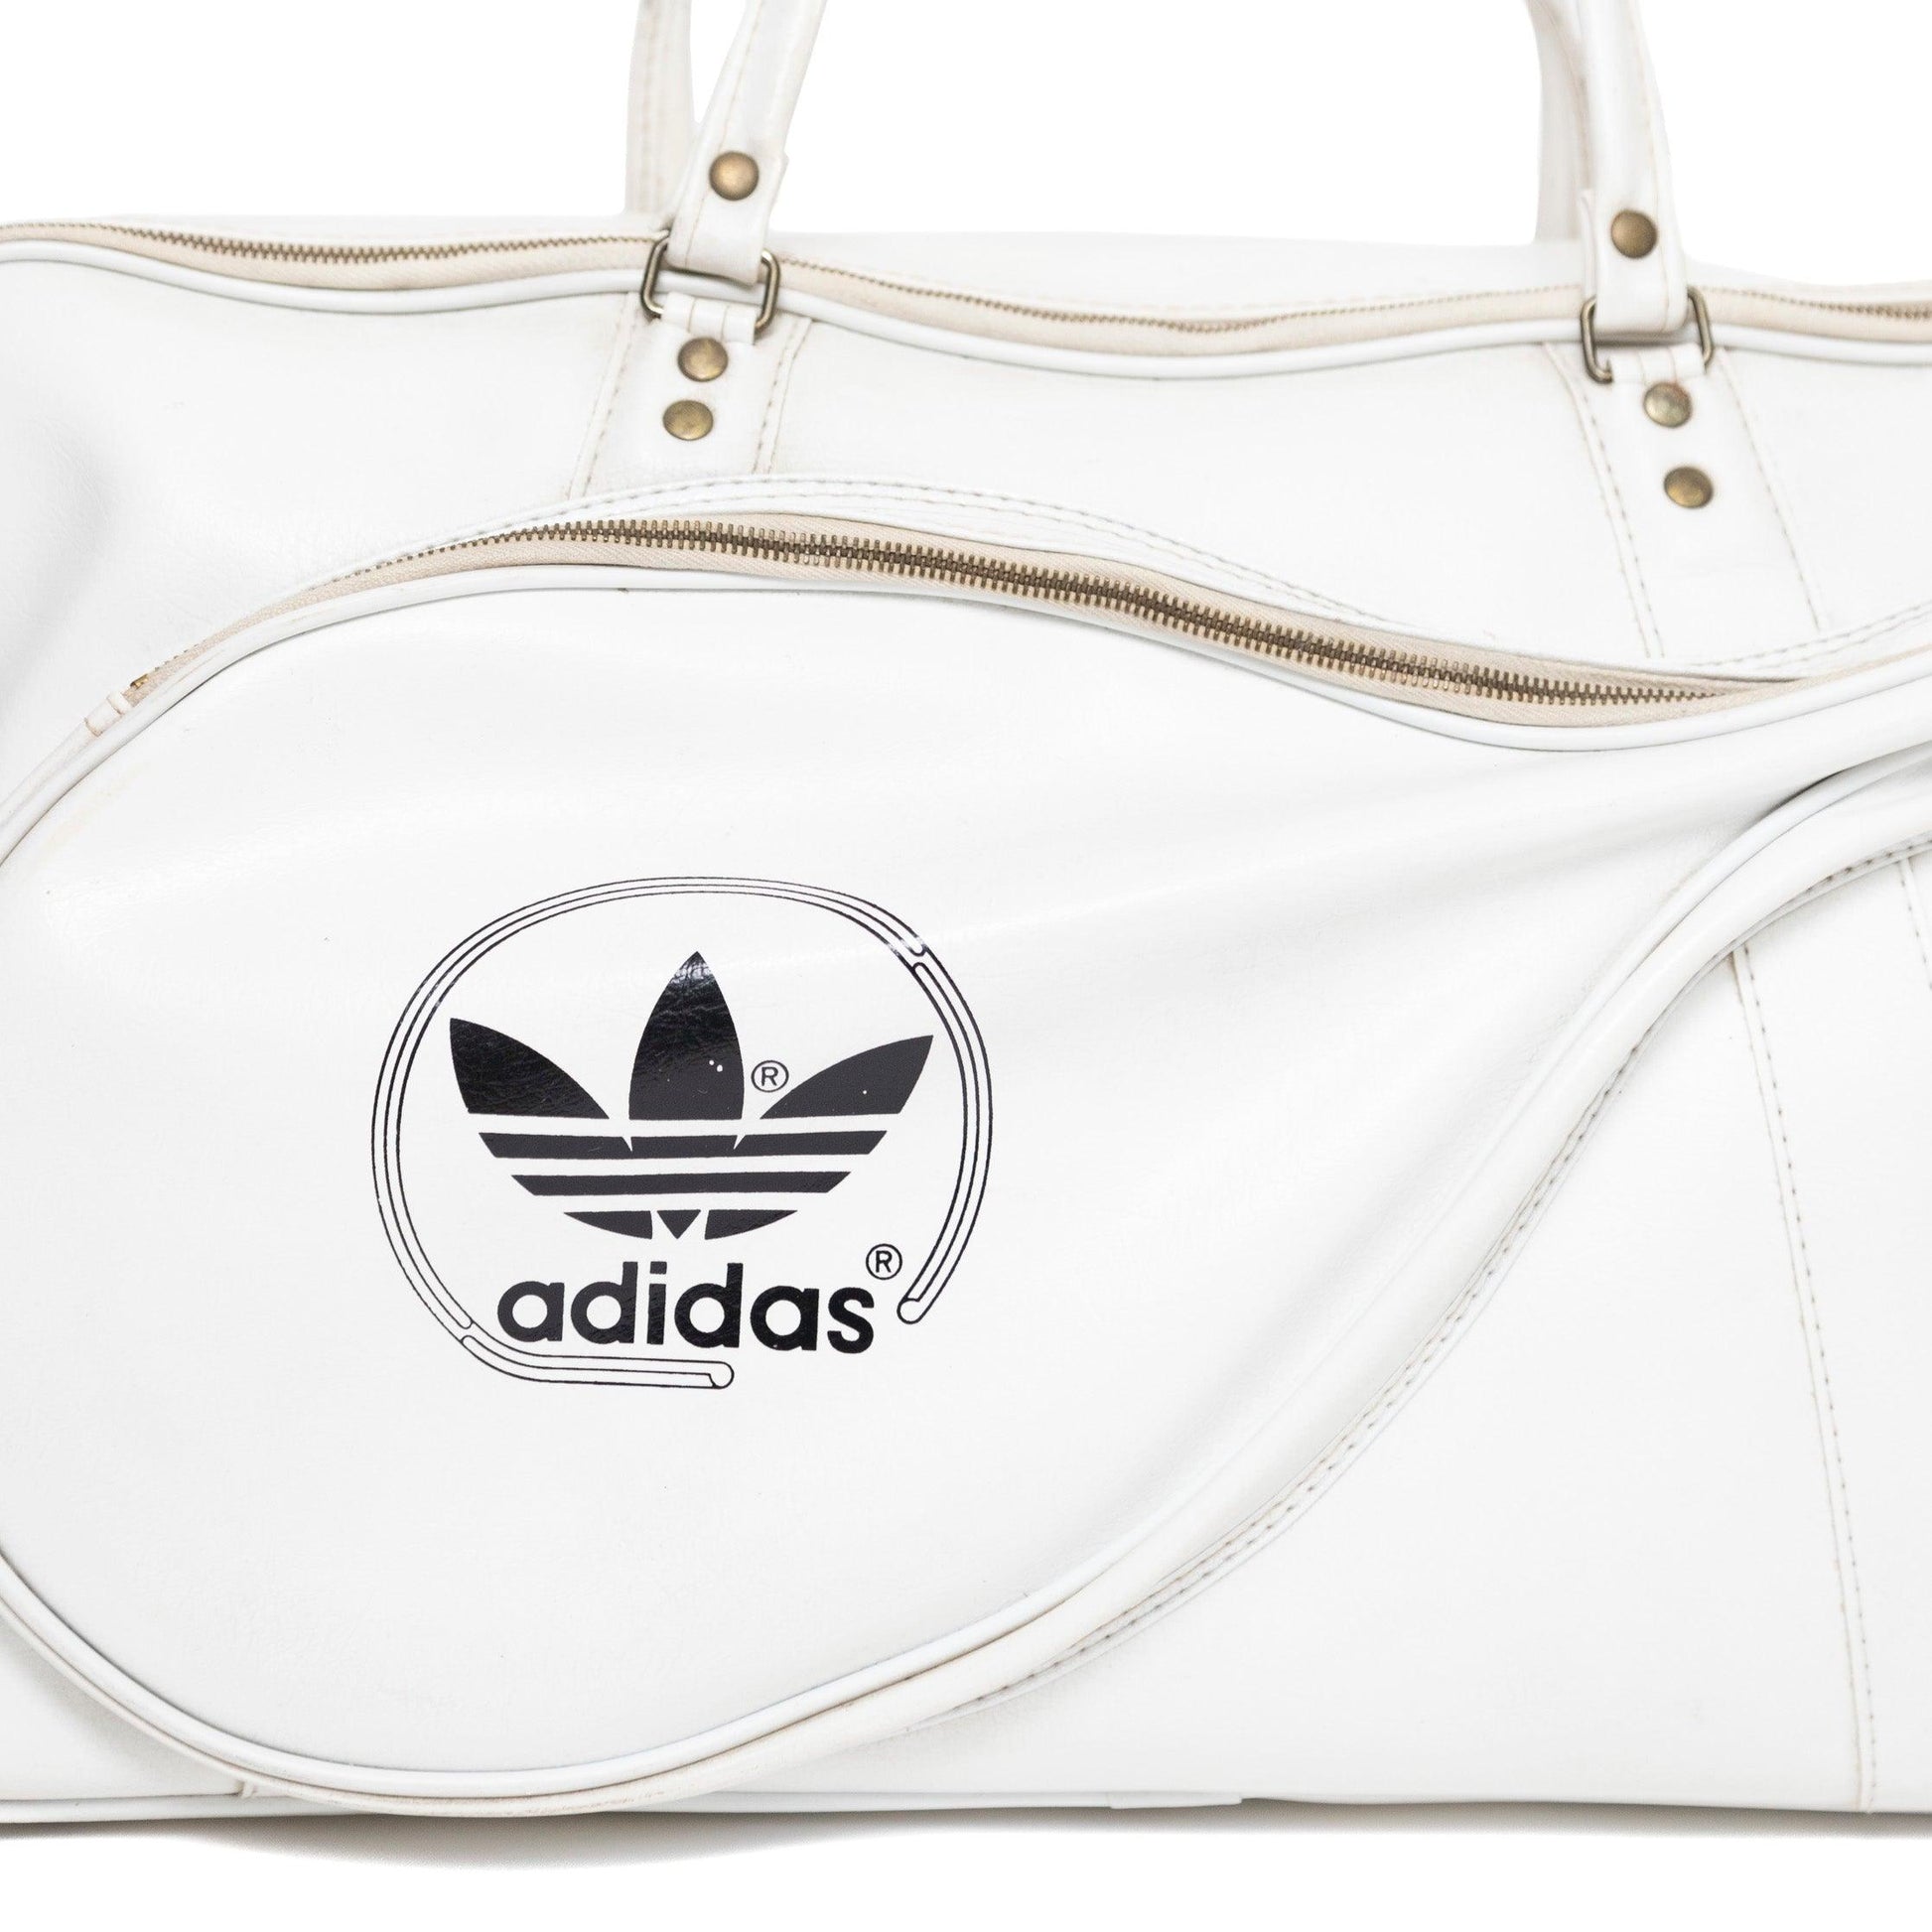 Adidas 1970's Racquet Bag - Known Source